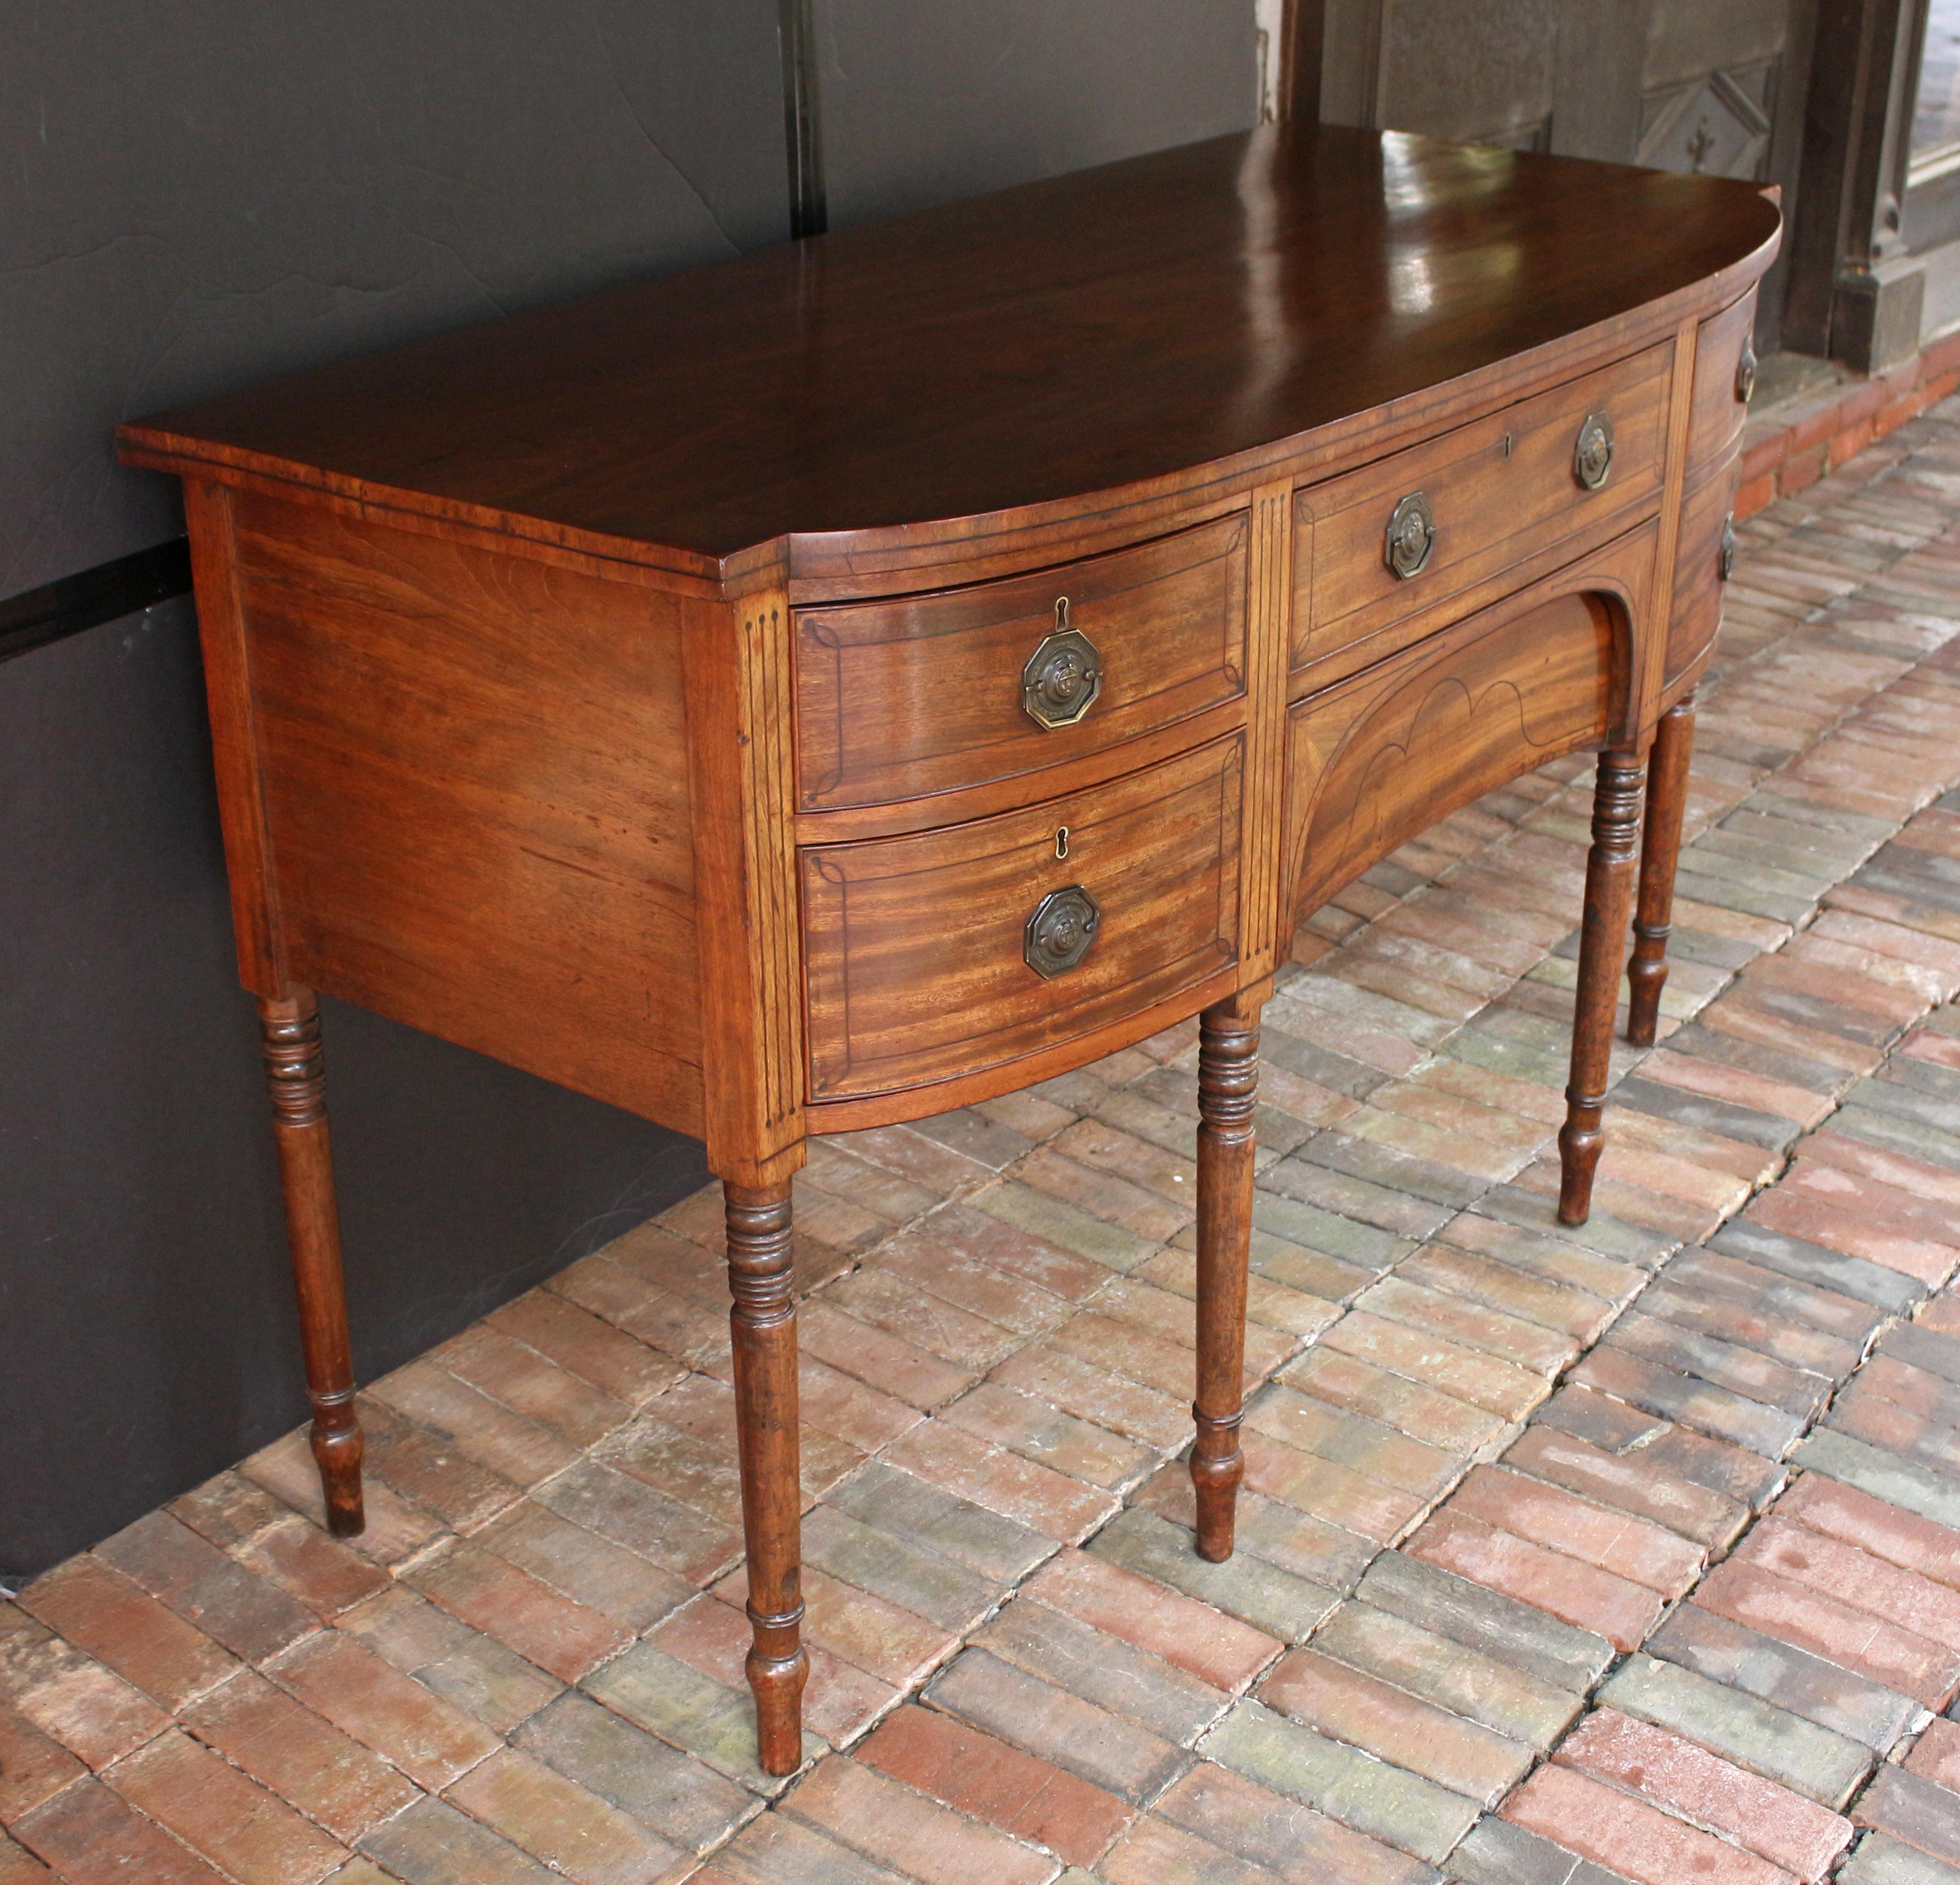 Circa 1800 English Sheraton Bowfront Sideboard In Good Condition For Sale In Chapel Hill, NC